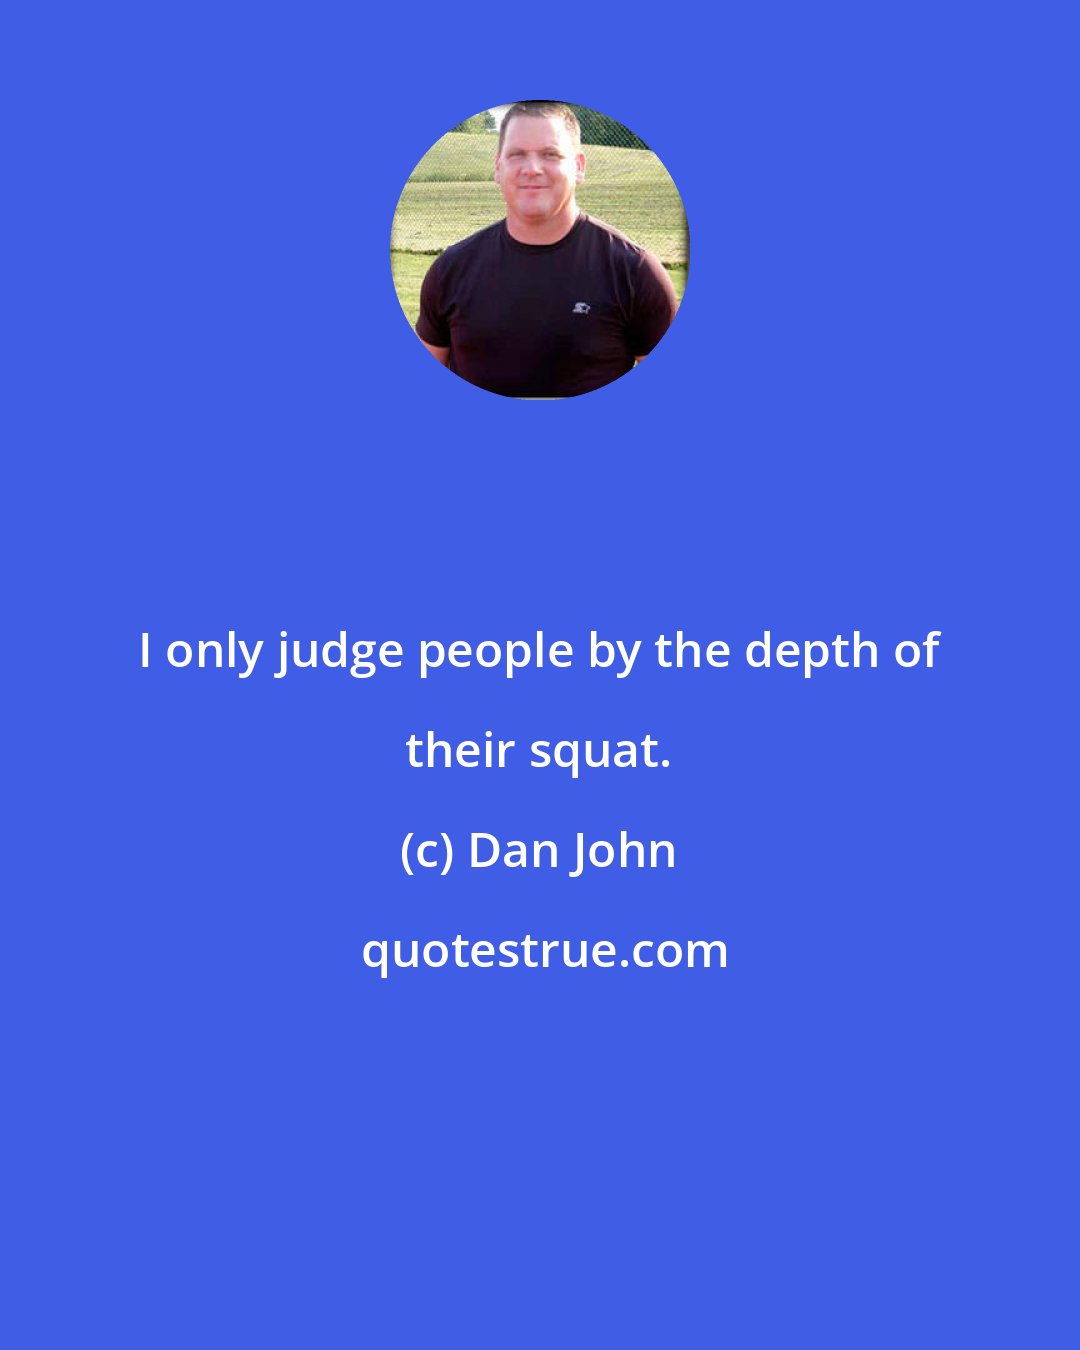 Dan John: I only judge people by the depth of their squat.